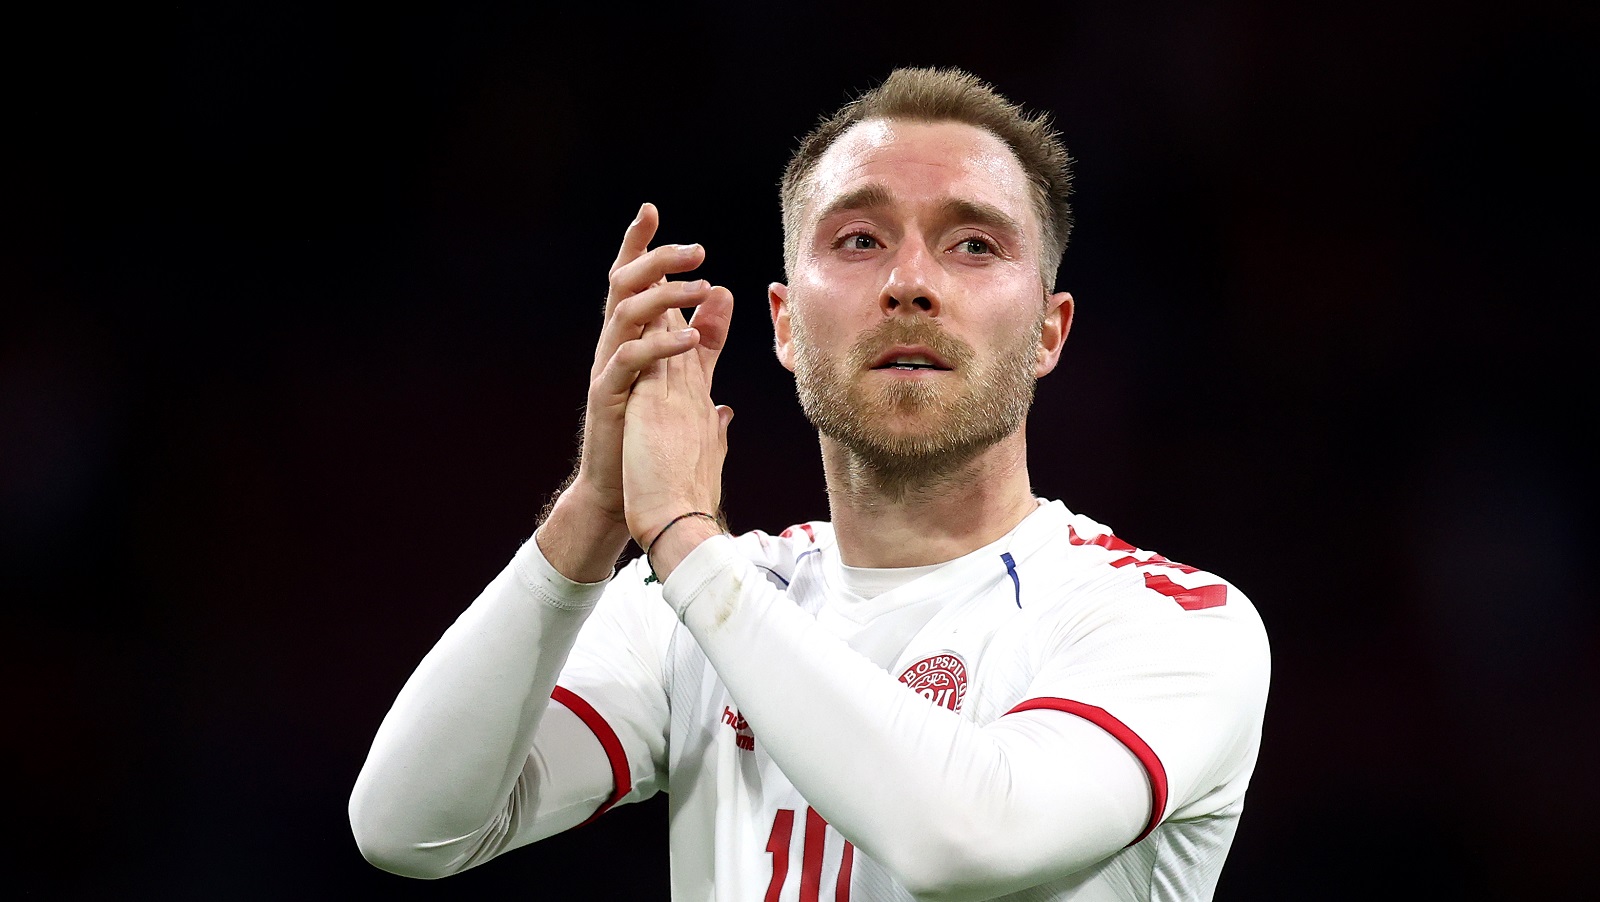 Christian Eriksen of Denmark applauds fans after a loss in an International friendly against the Netherlands on March 26, 2022, in Amsterdam.